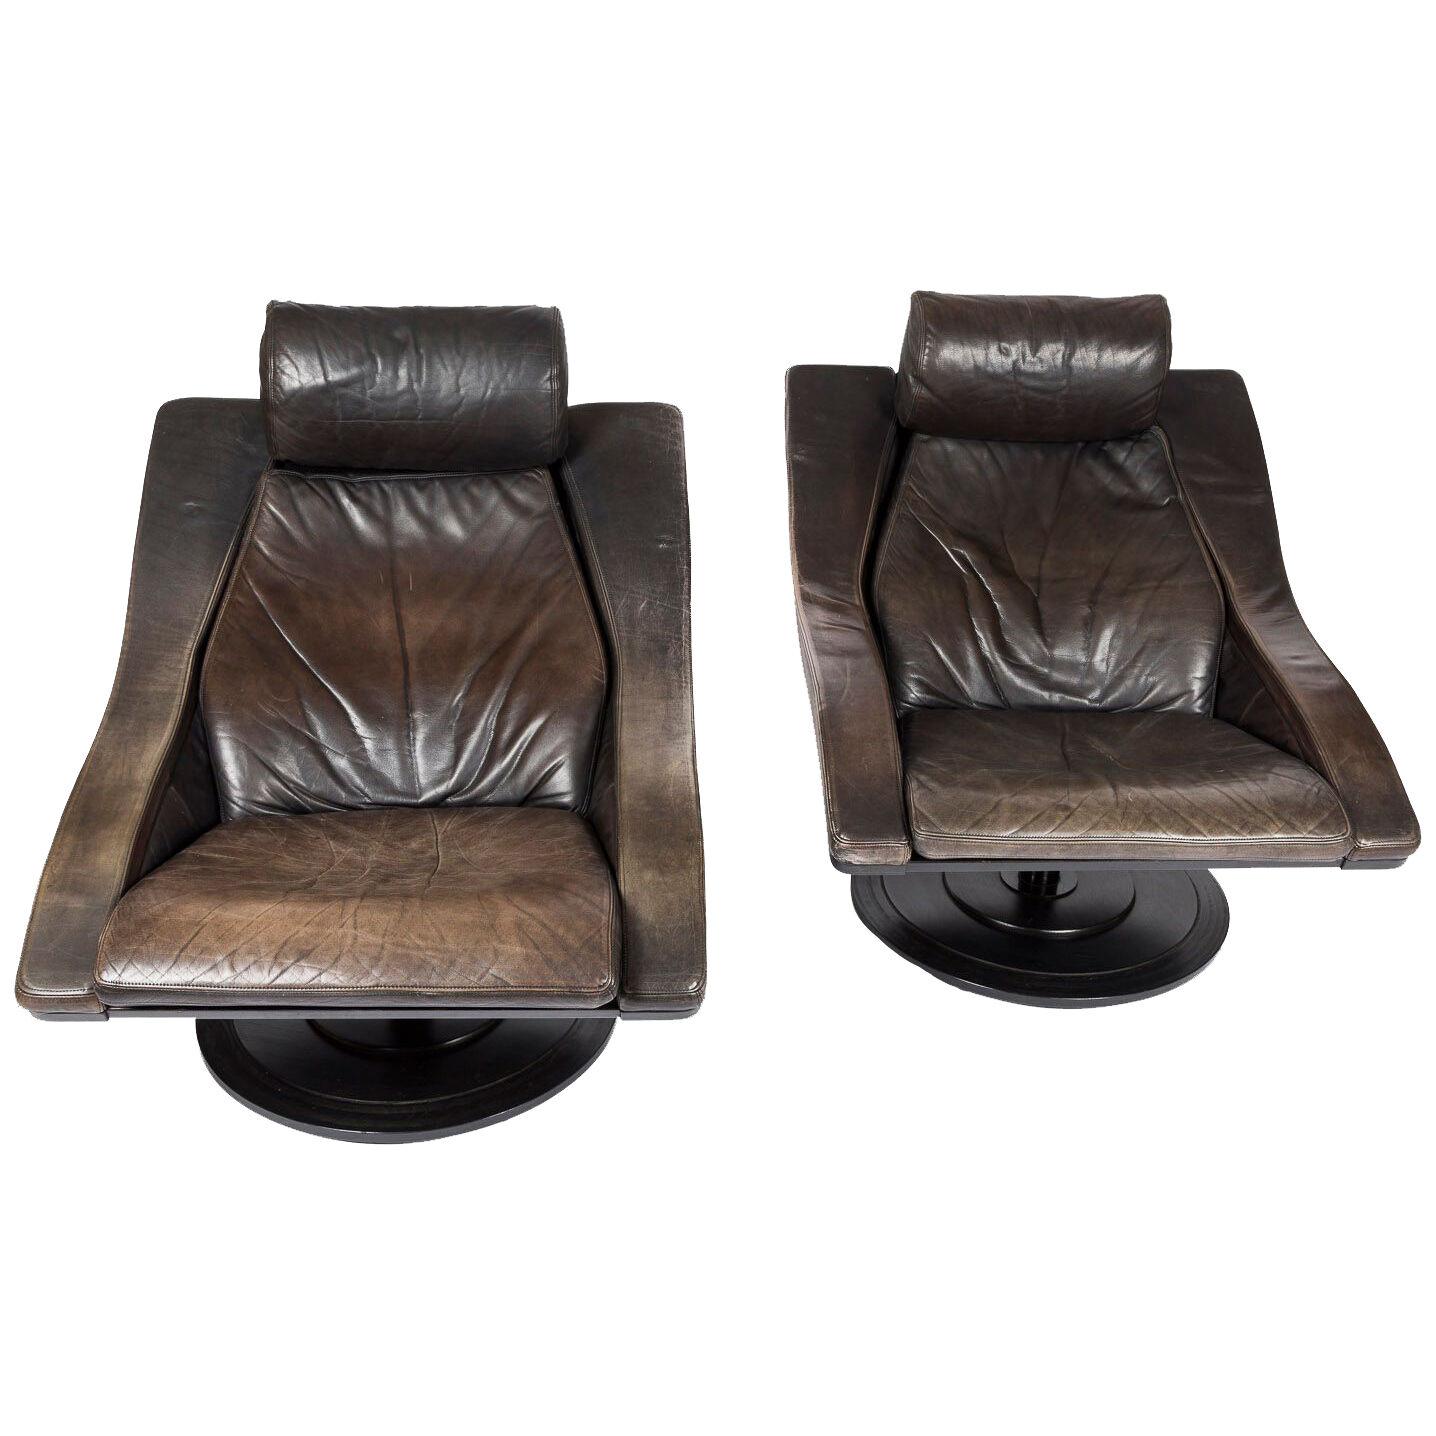 A pair of 1970s Swedish black swivel easy chairs